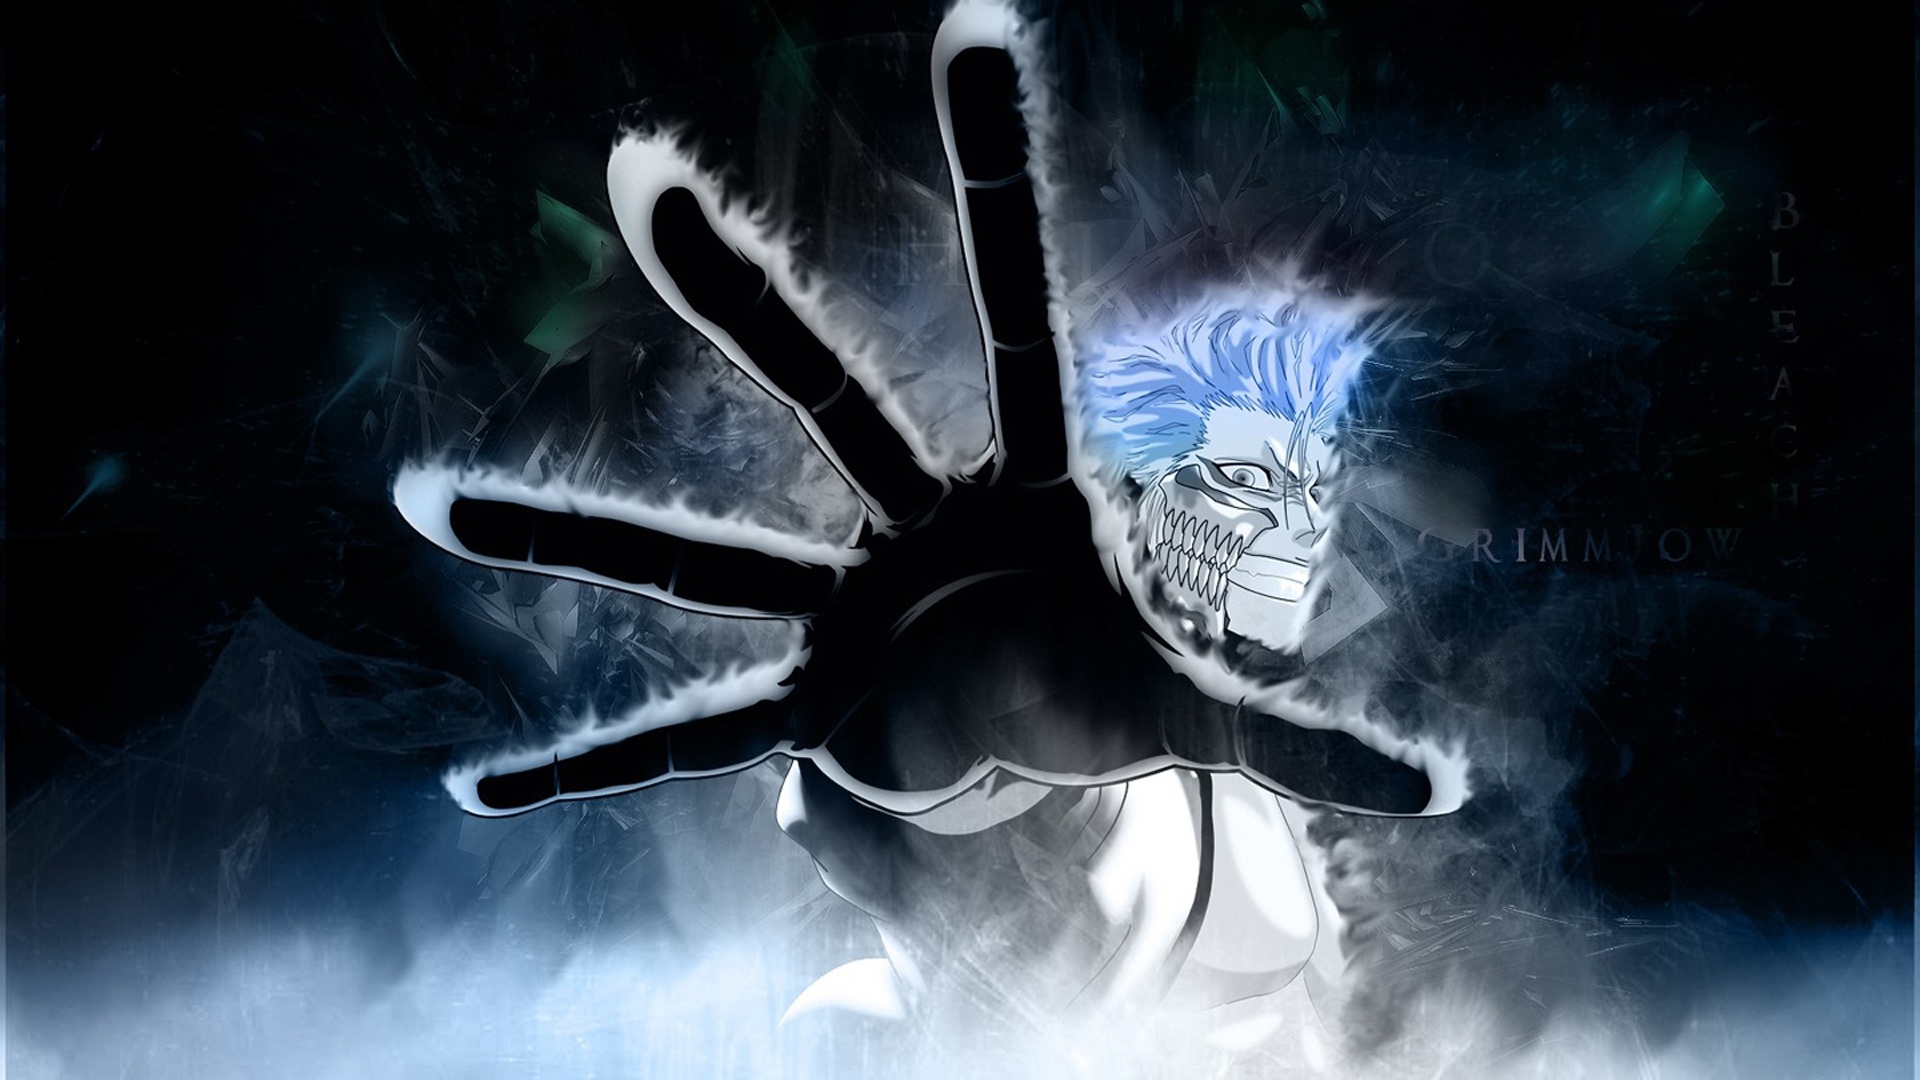 Grimmjow Jaggerjack: The main antagonist whose name comes from European architect Nicholas Grimshaw and the German word for hunter. 1920x1080 Full HD Wallpaper.